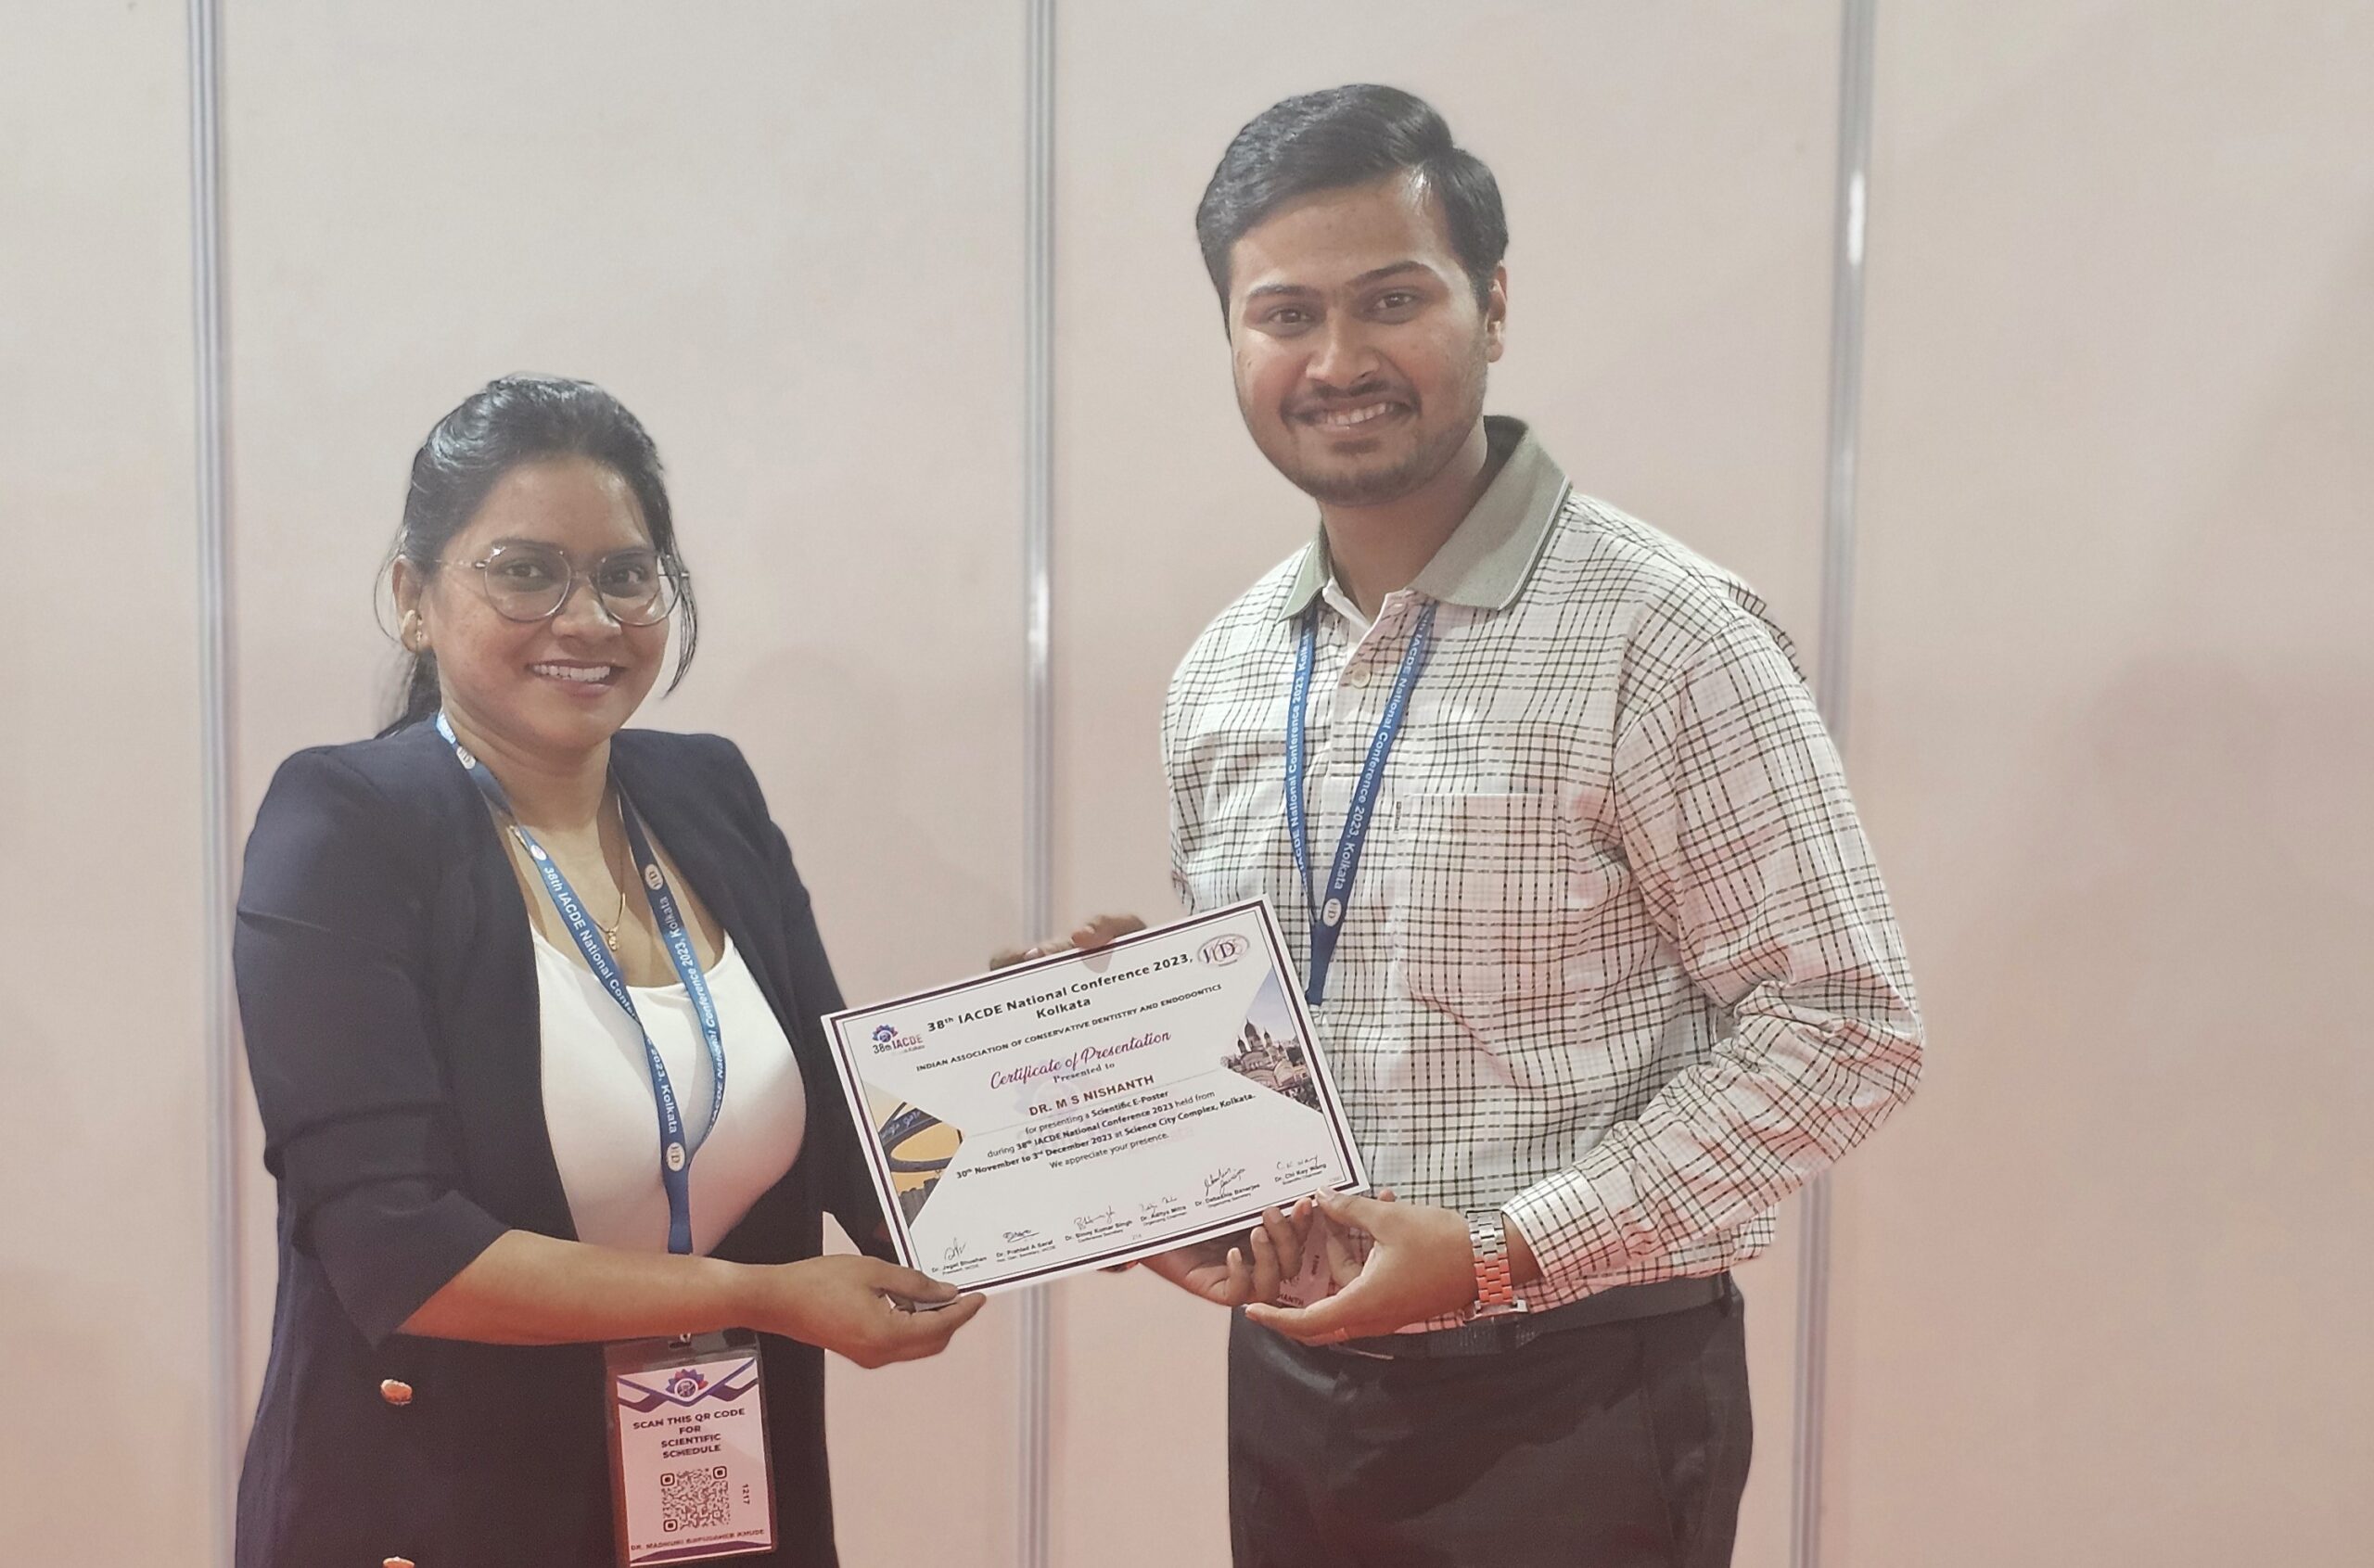 Dr MS Nishanth for Securing 1st position in Scientific Poster Presentation at 38th IACDE conference was held in Kolkata from 30th November to 3rd December 2023.